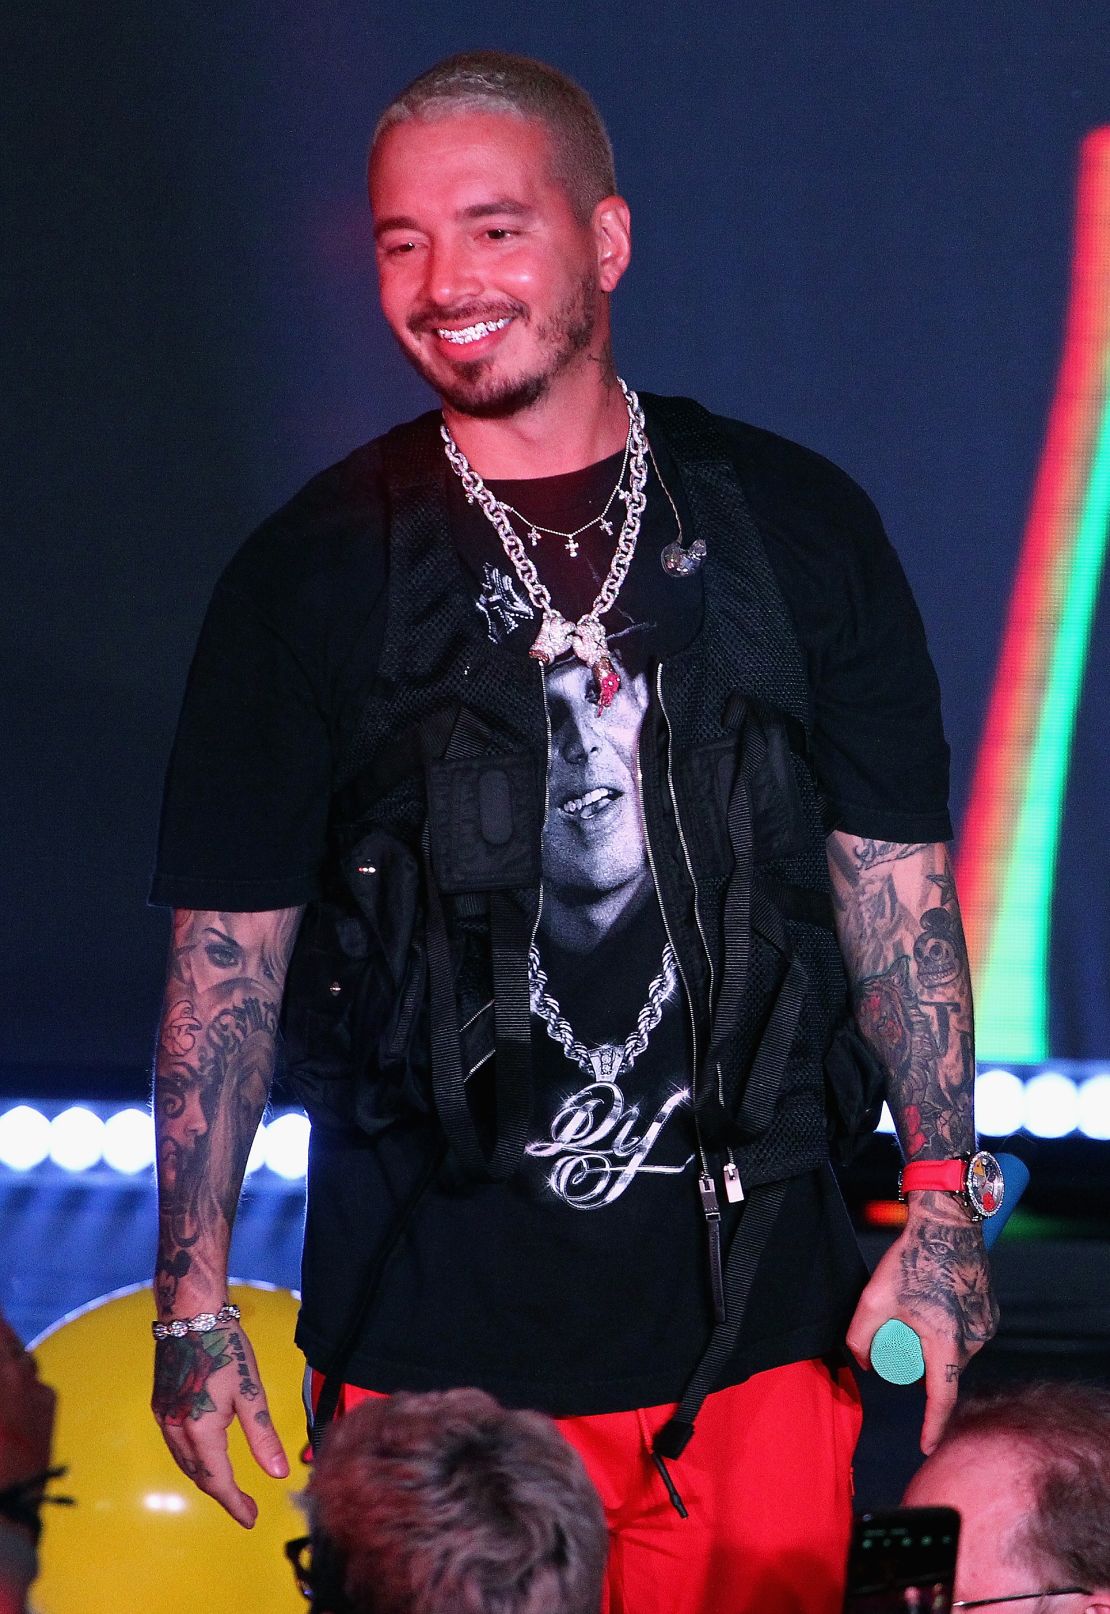 J Balvin performs onstage at the GUESS x J Balvin launch party in Los Angeles, February 8, 2019.  